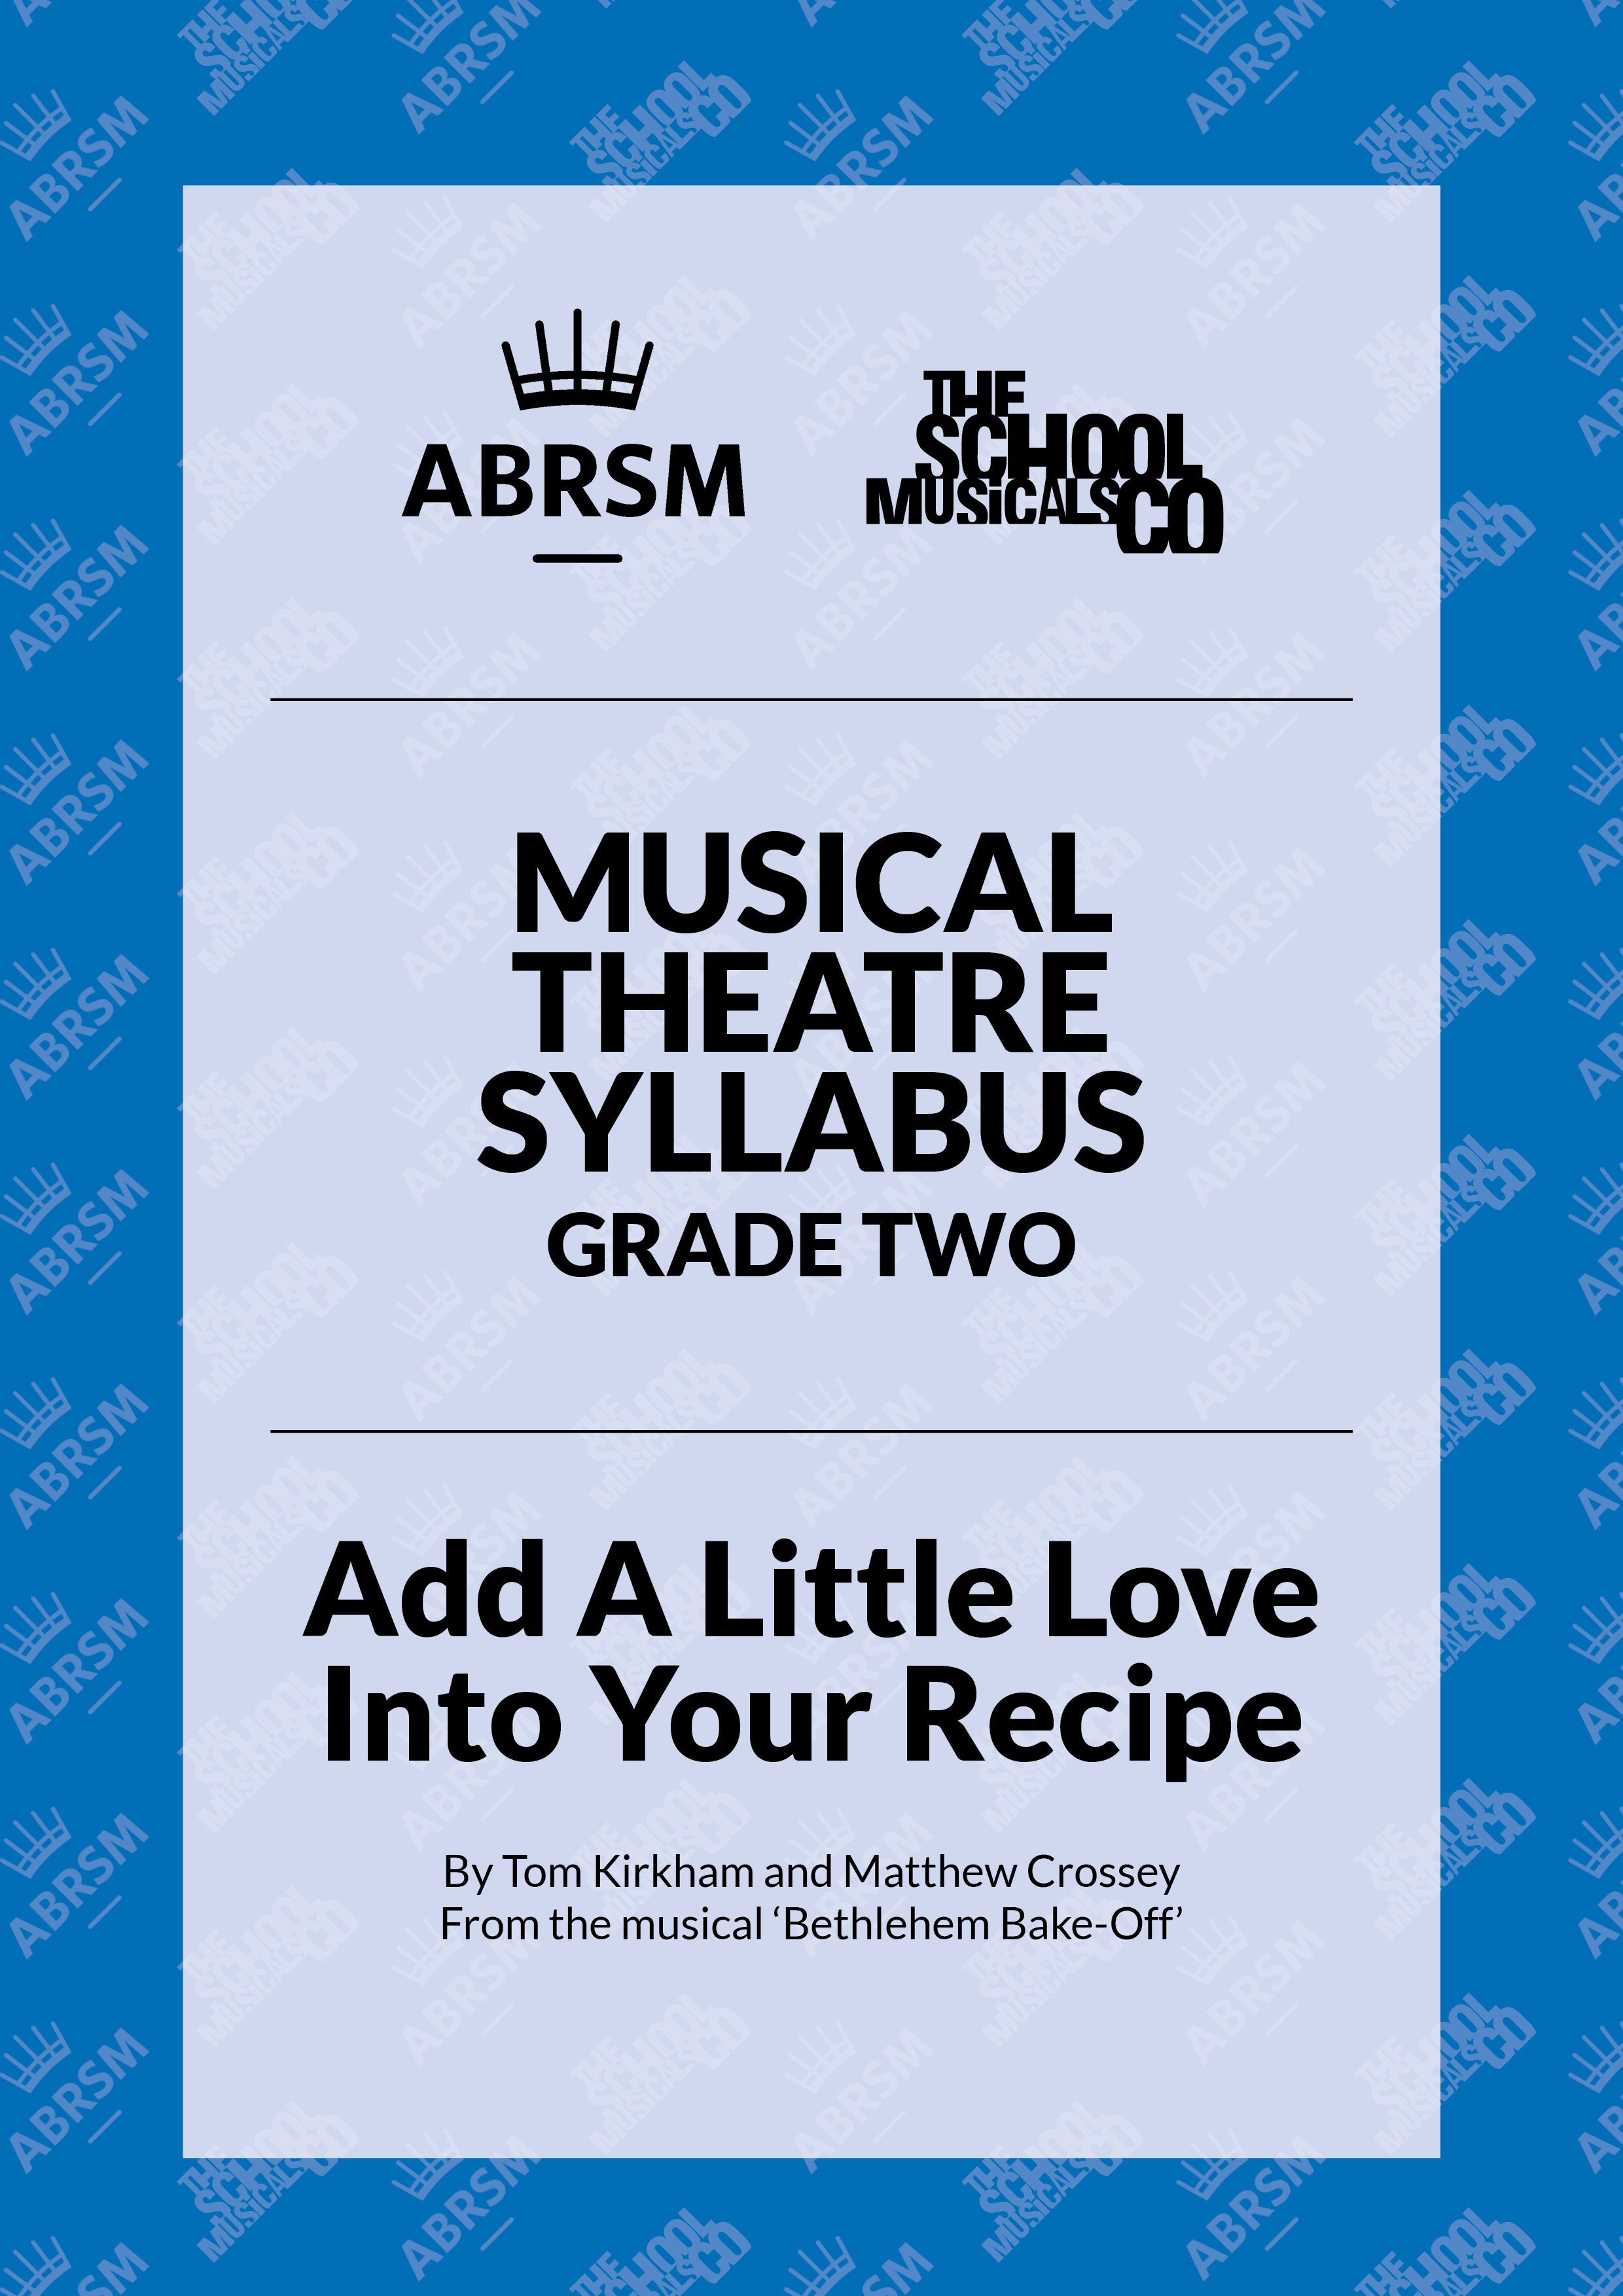 Add A Little Love Into Your Recipe - ABRSM Musical Theatre Syllabus Grade Two